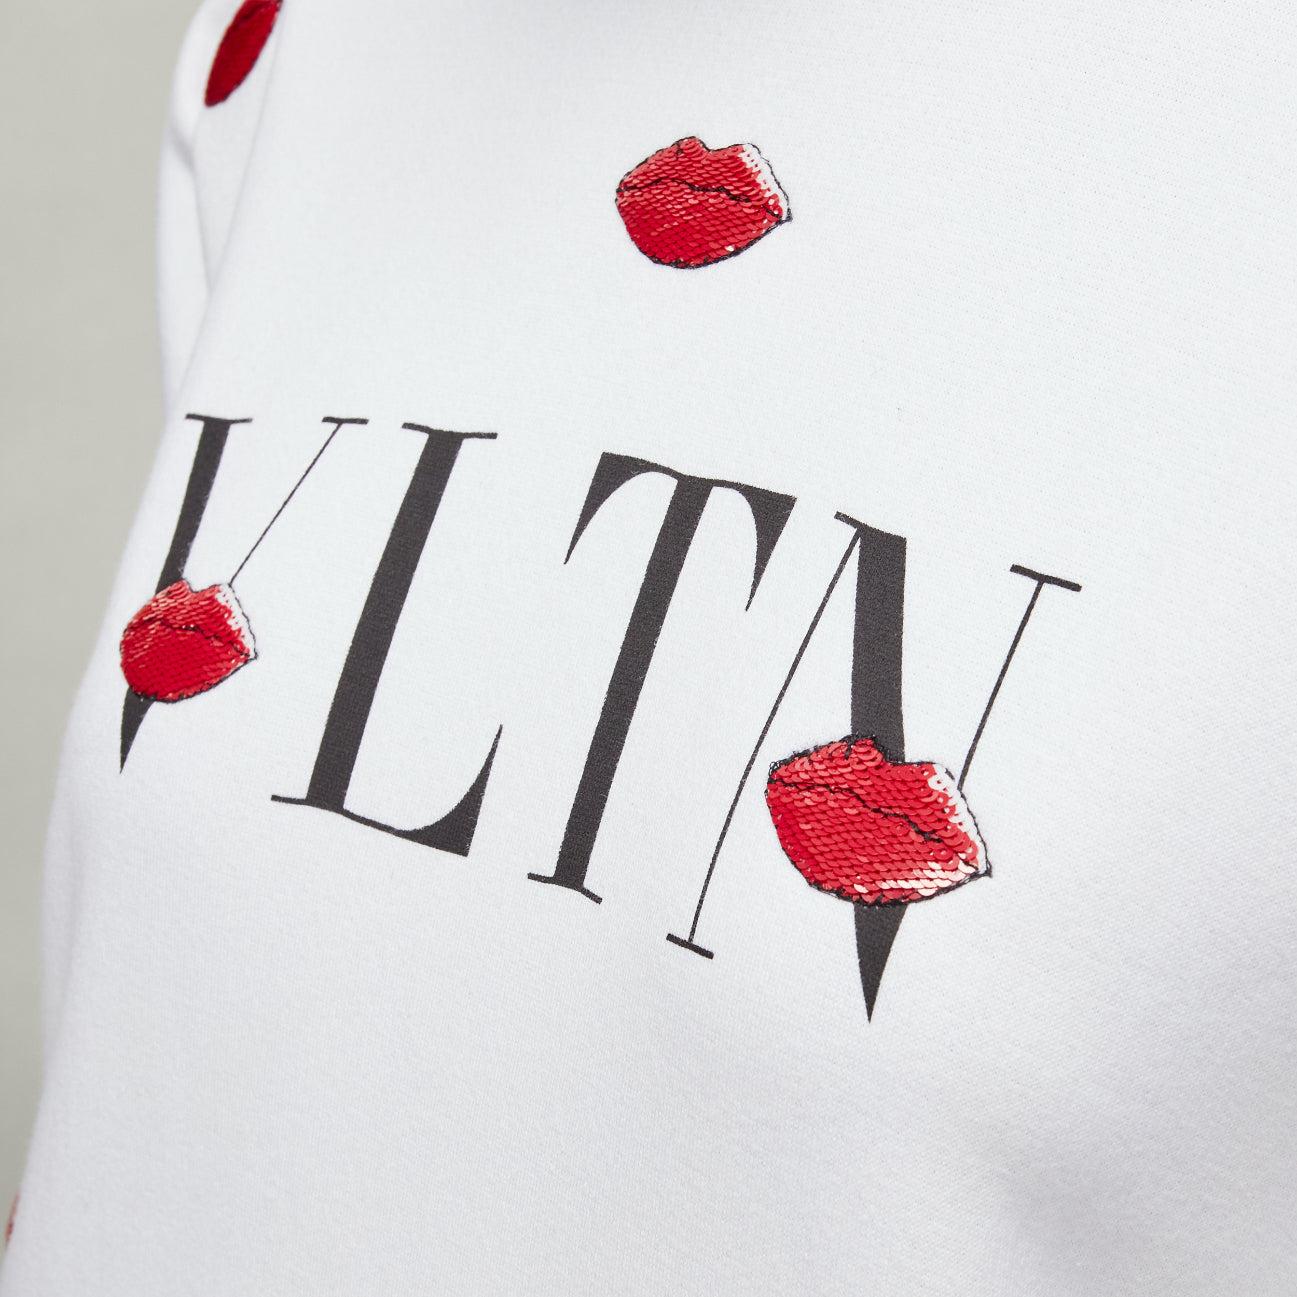 VALENTINO VLTN Le Rouge Kisses white red sequin lips embroidery oversized hoodie XXS
Reference: AAWC/A01135
Brand: Valentino
Designer: Pier Paolo Piccioli
Collection: Le Rouge Kisses
Material: Cotton, Blend
Color: White, Red
Pattern: Solid
Closure: